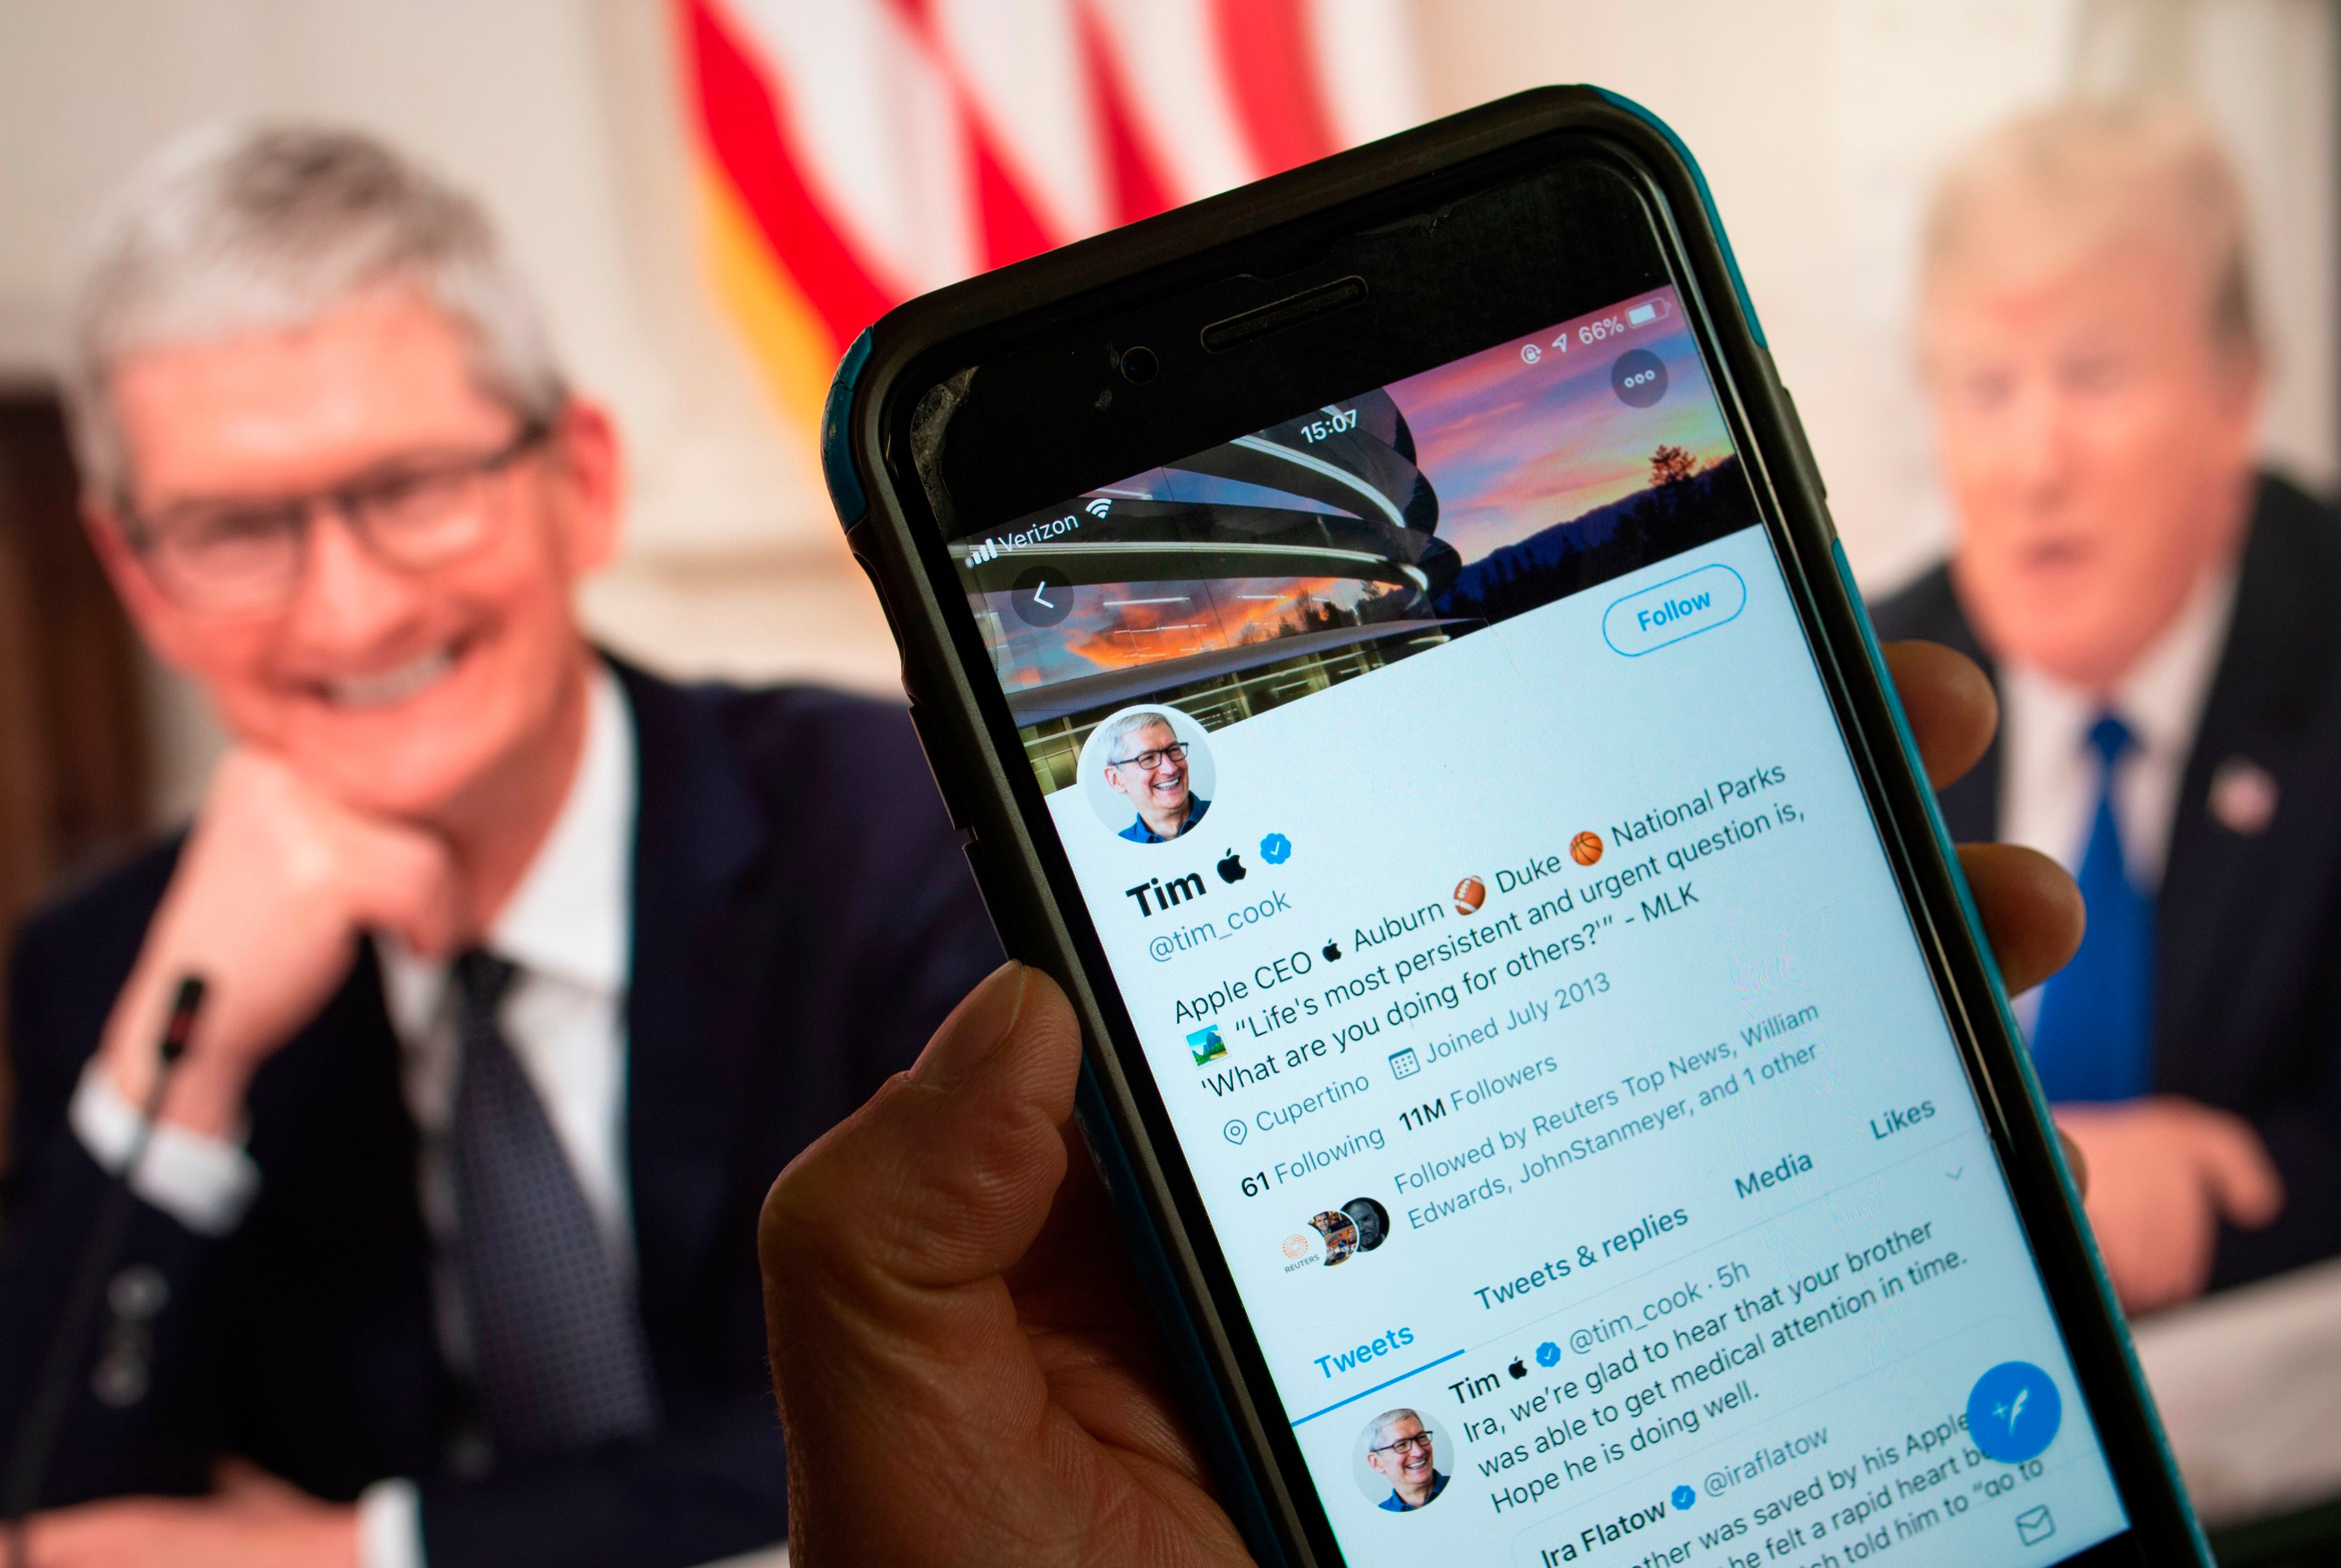 The Twitter feed of Apple chief executive Tim Cook, who turned into "Tim Apple" on social media Thursday, March 7, 2019 after a slip-up by US President Donald Trump sparked a viral moment on Twitter